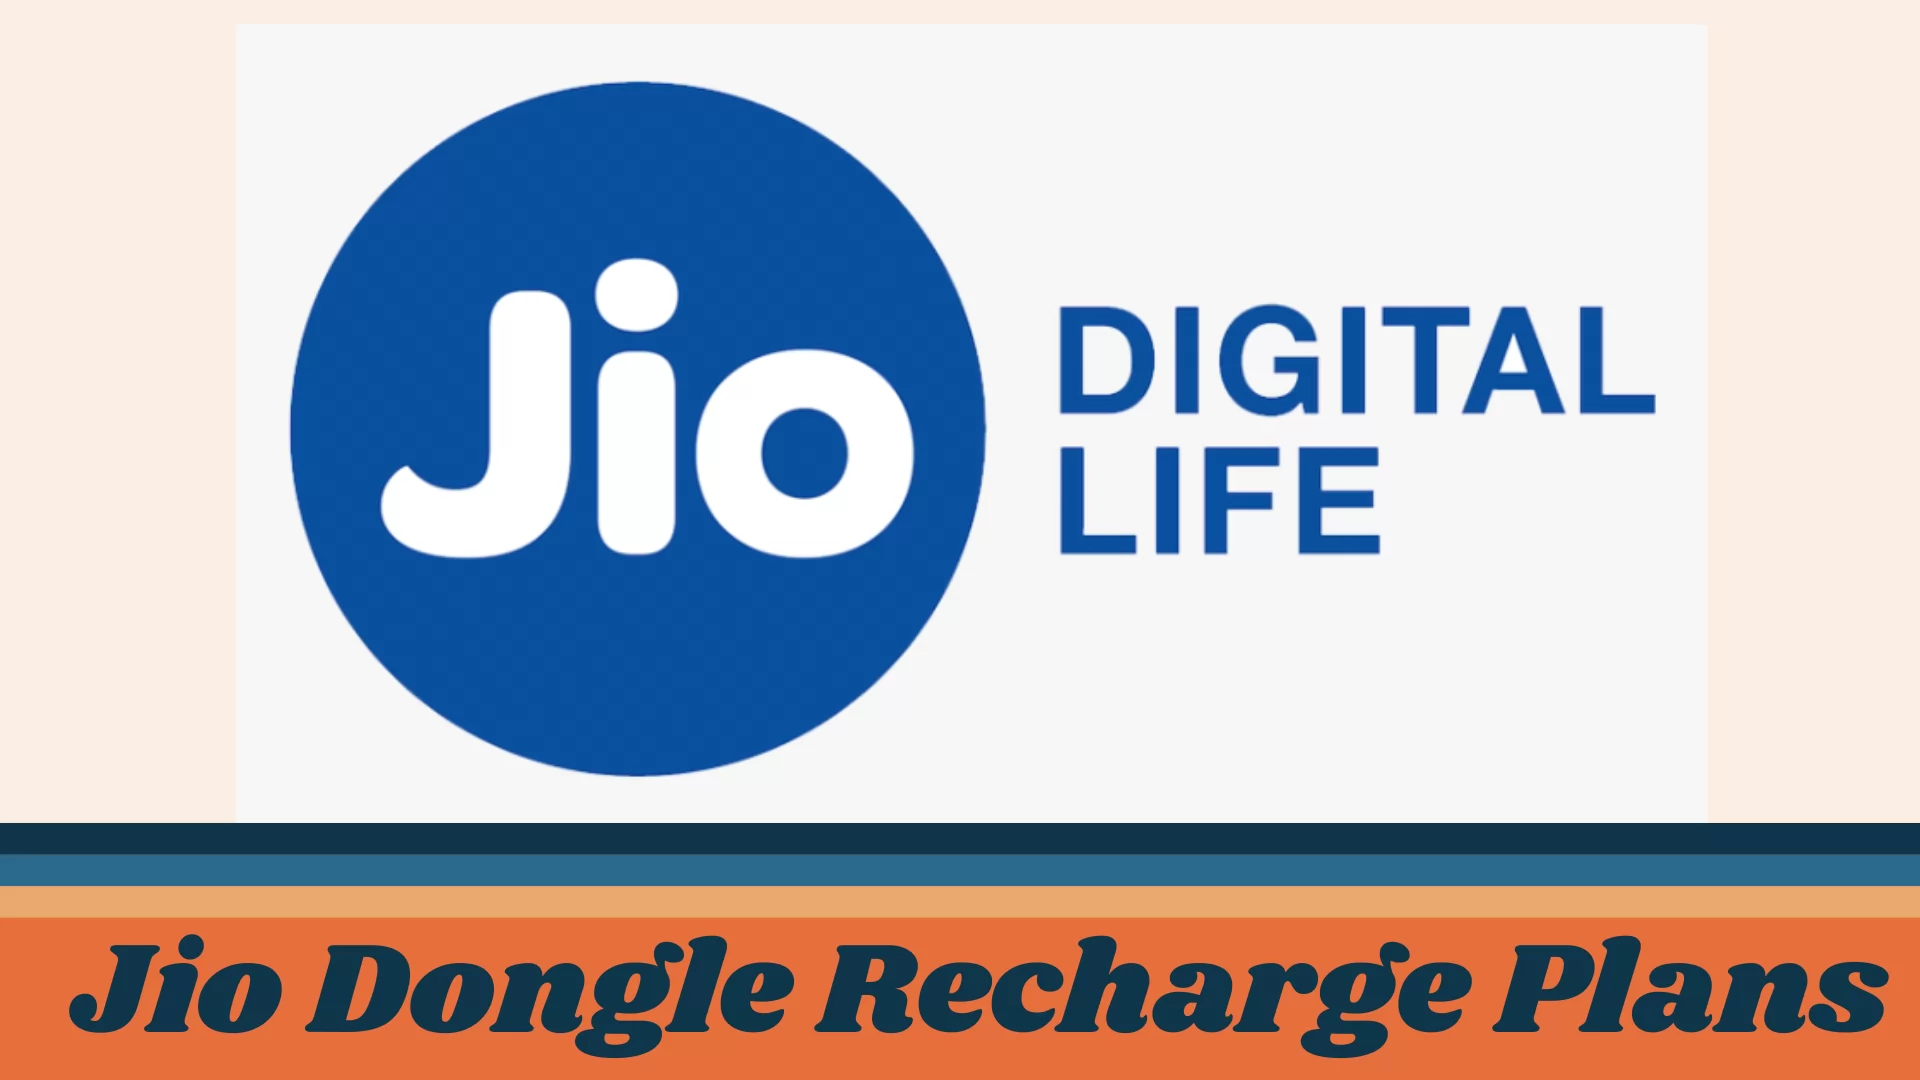 Jio Dongle Recharge Plans